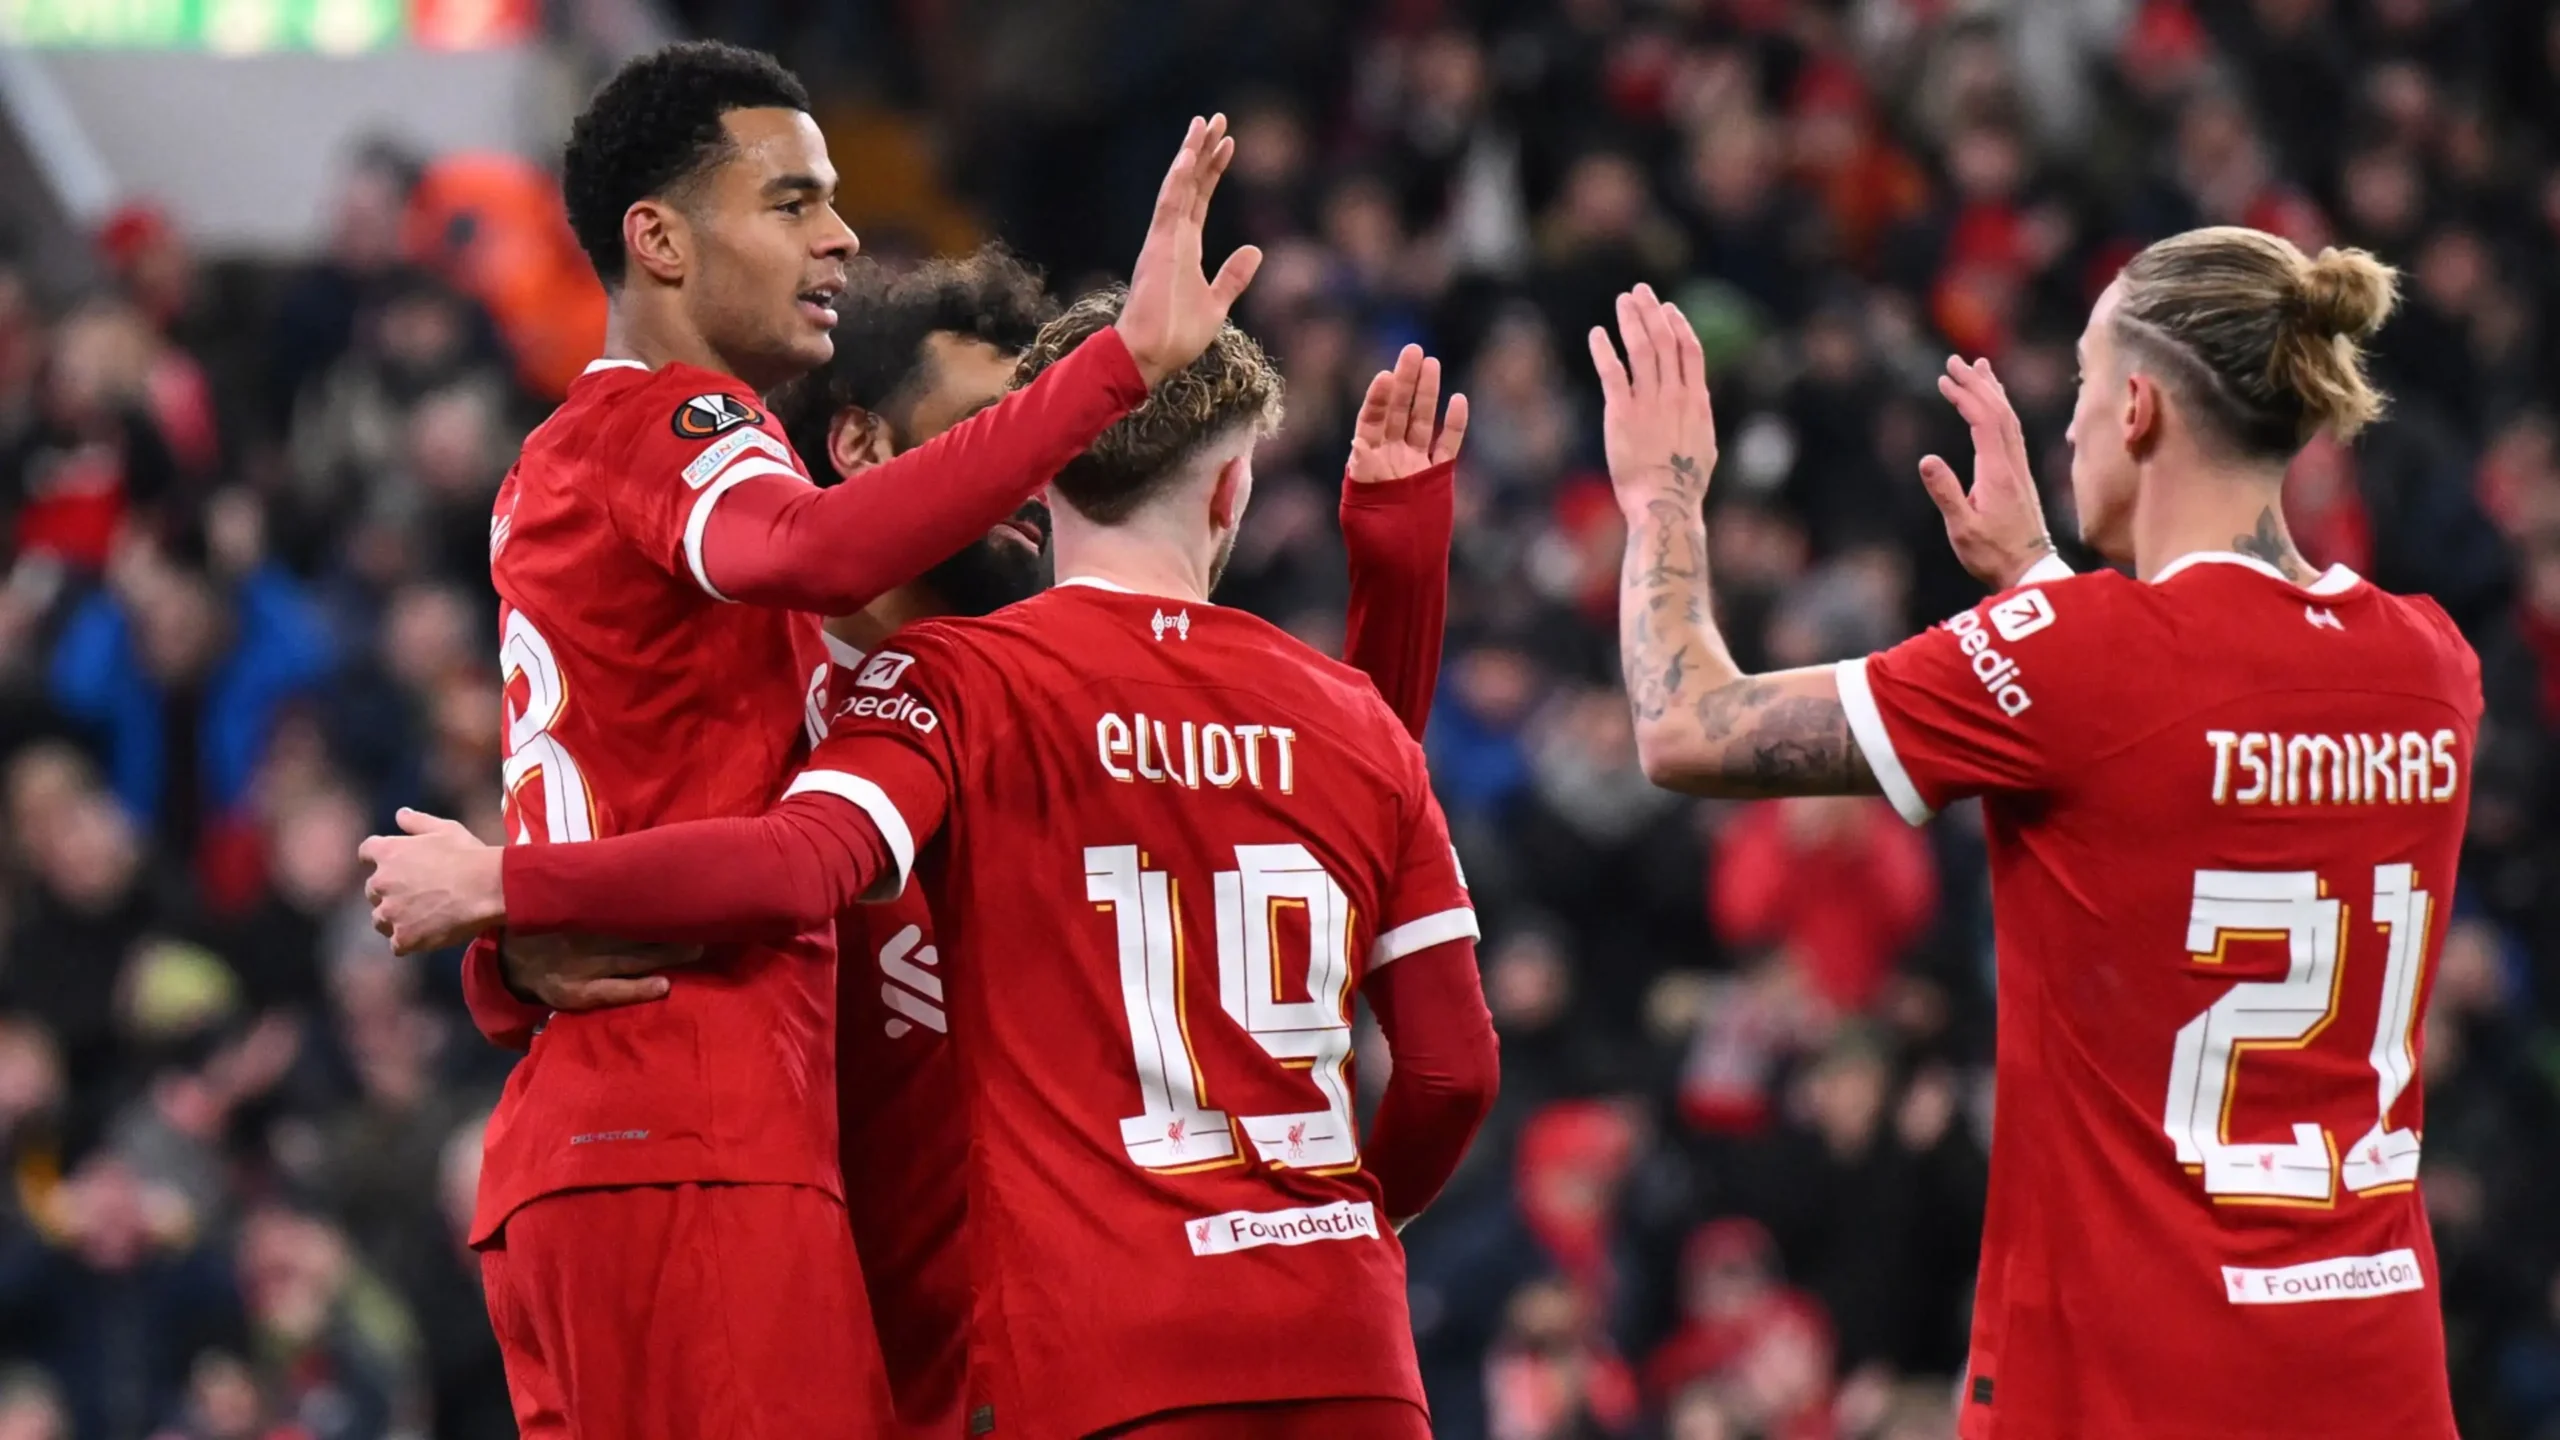 Liverpool has sailed to the last 16 of the Europa League as group champions with a win over LASK at Anfield.